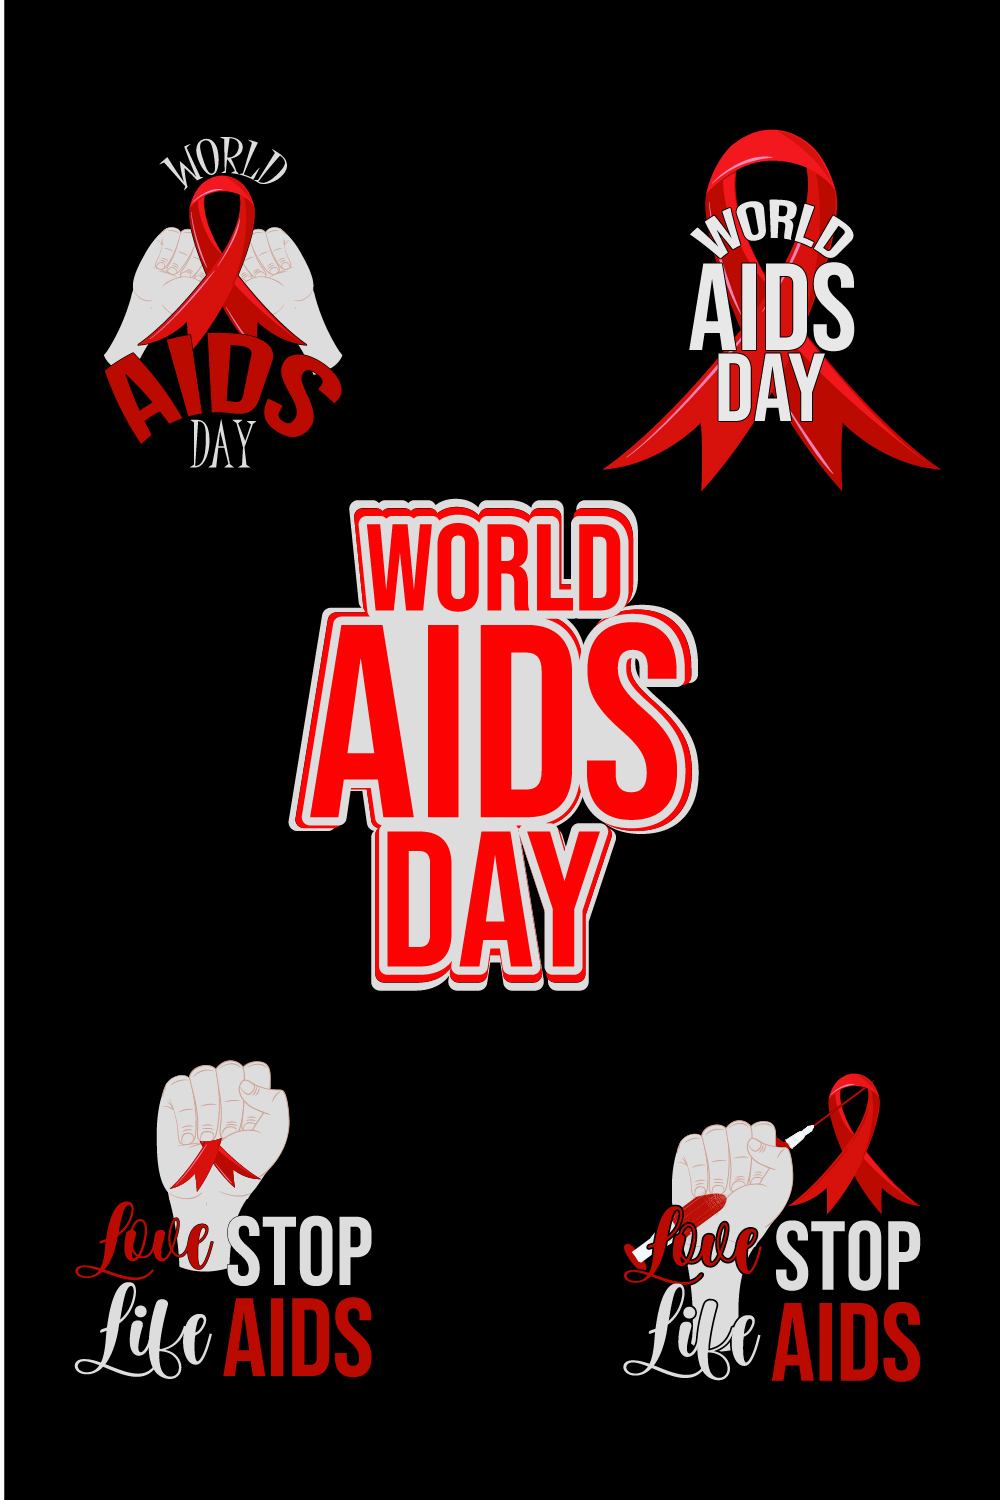 World aids day concept stock illustration AIDS Awareness Ribbon vector pinterest preview image.